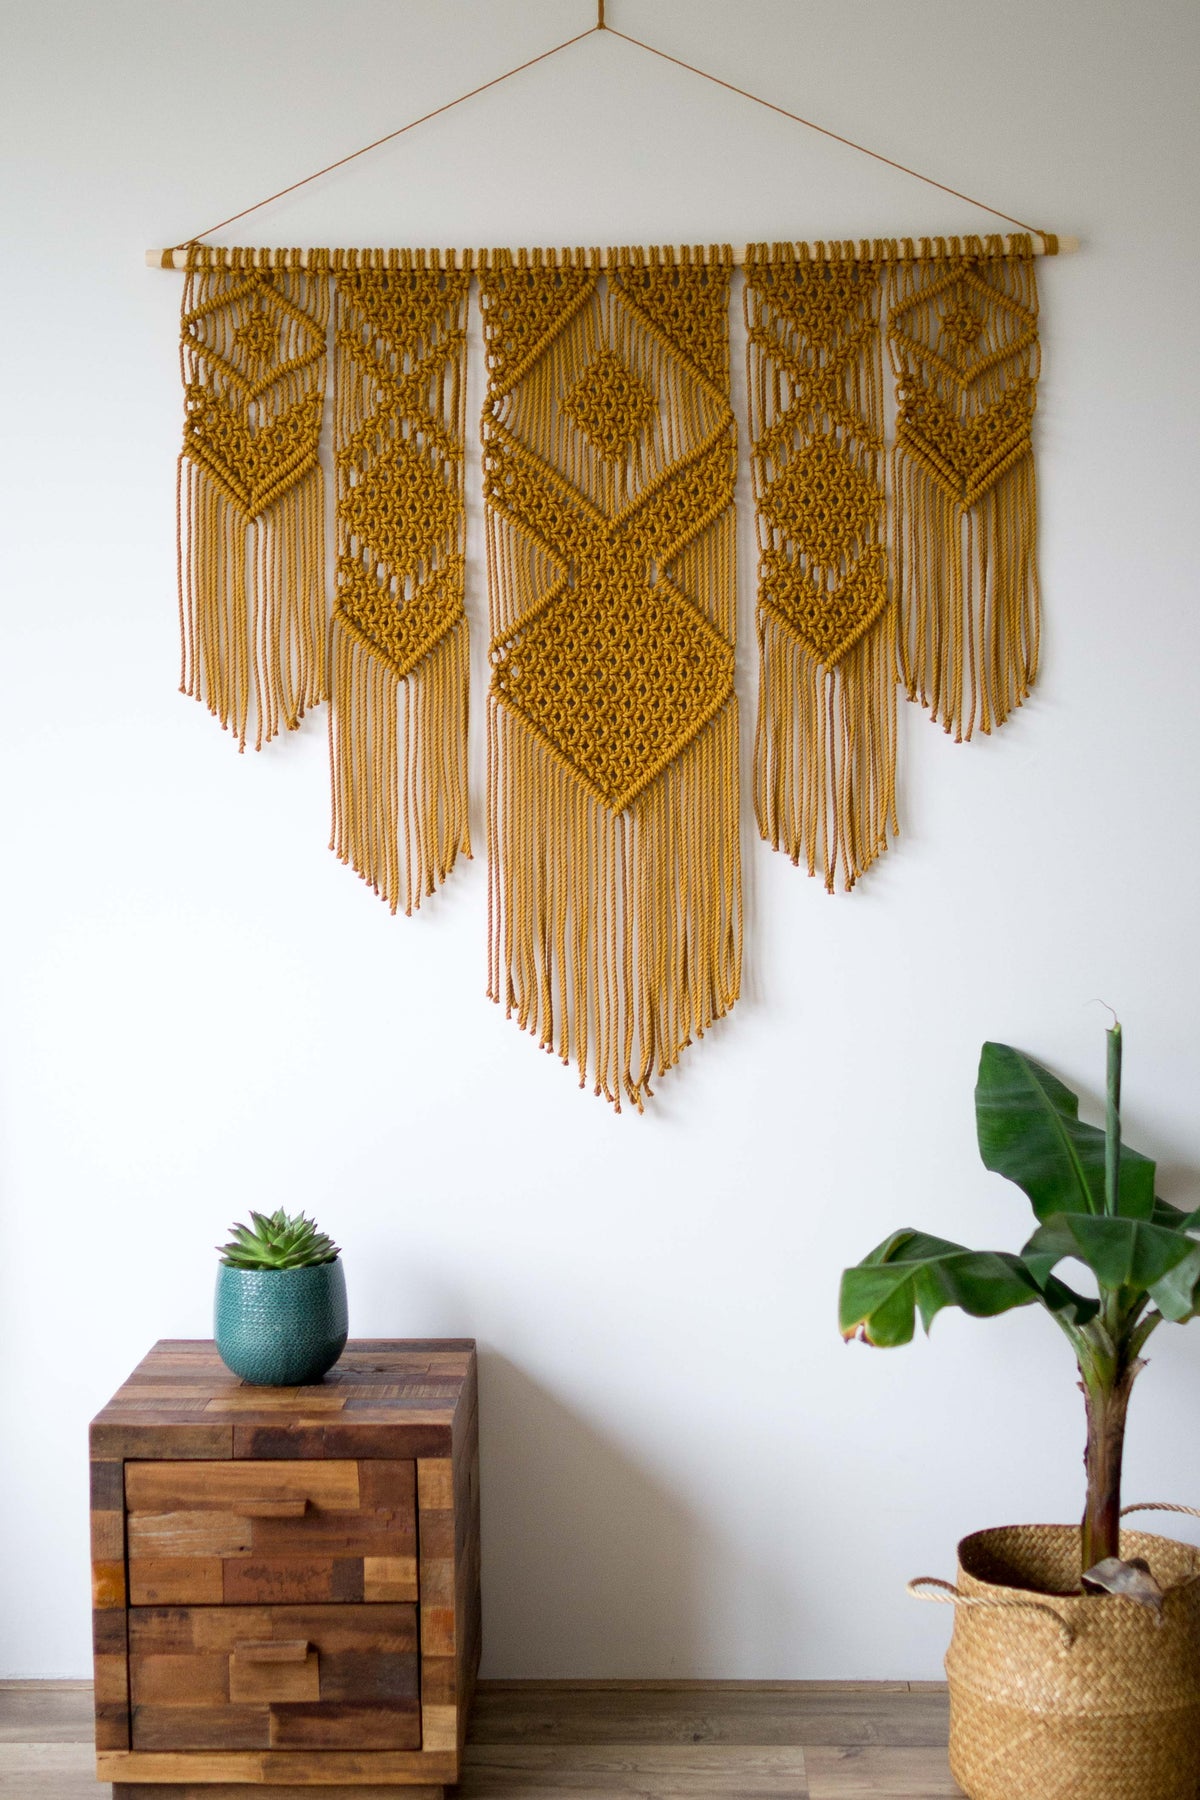 Macrame Wall Hanging / 116cm x 100cm (46&quot; x 40&quot;) / White, Grey, Navy Blue, Mustard, Wheat and Lavender